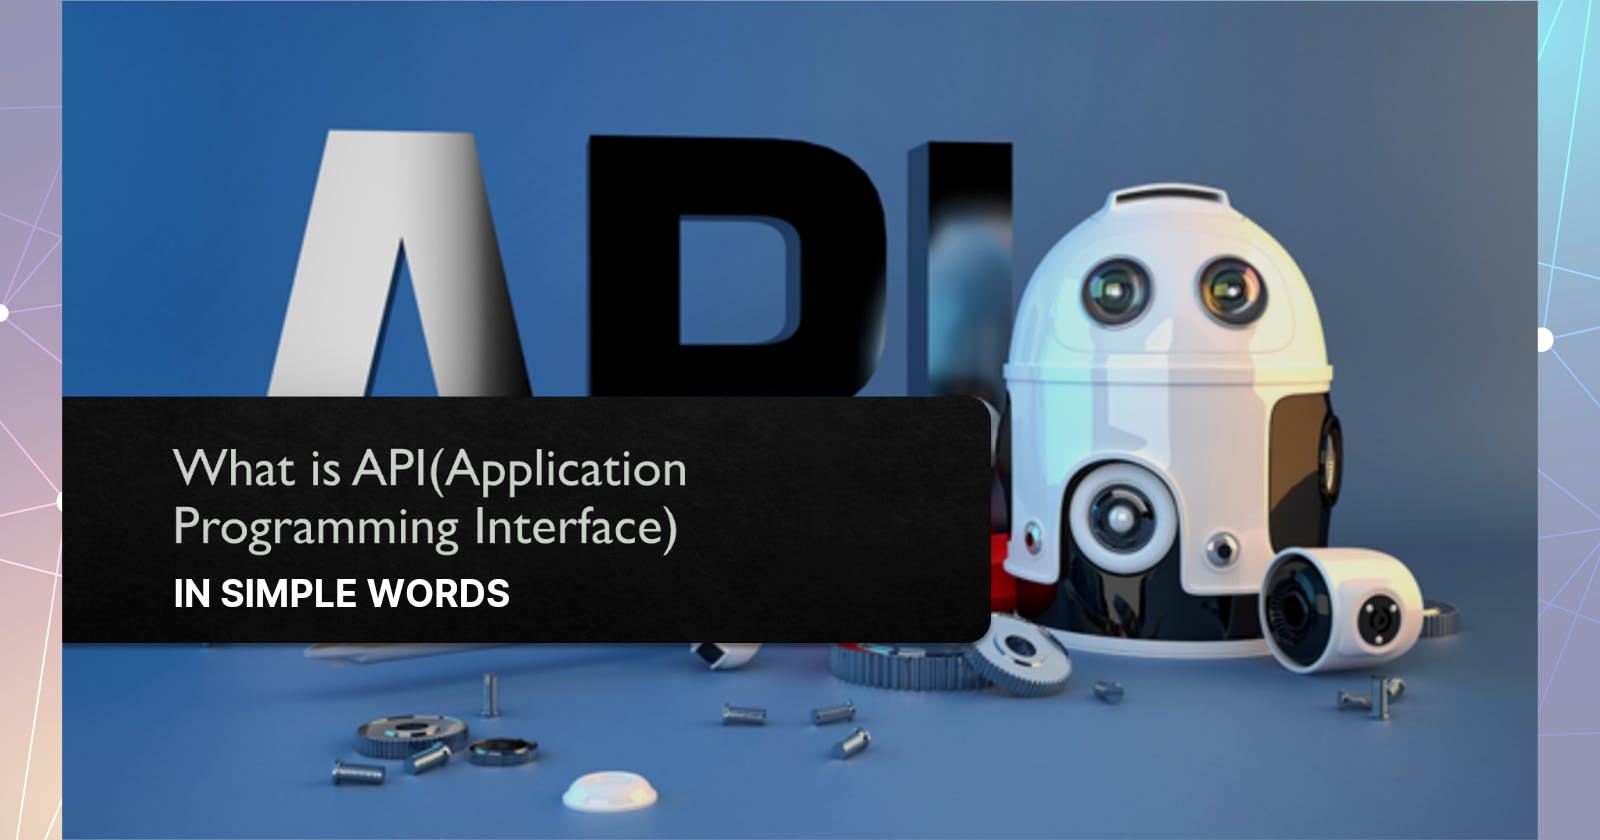 Introduction to API (Application Programming Interface)